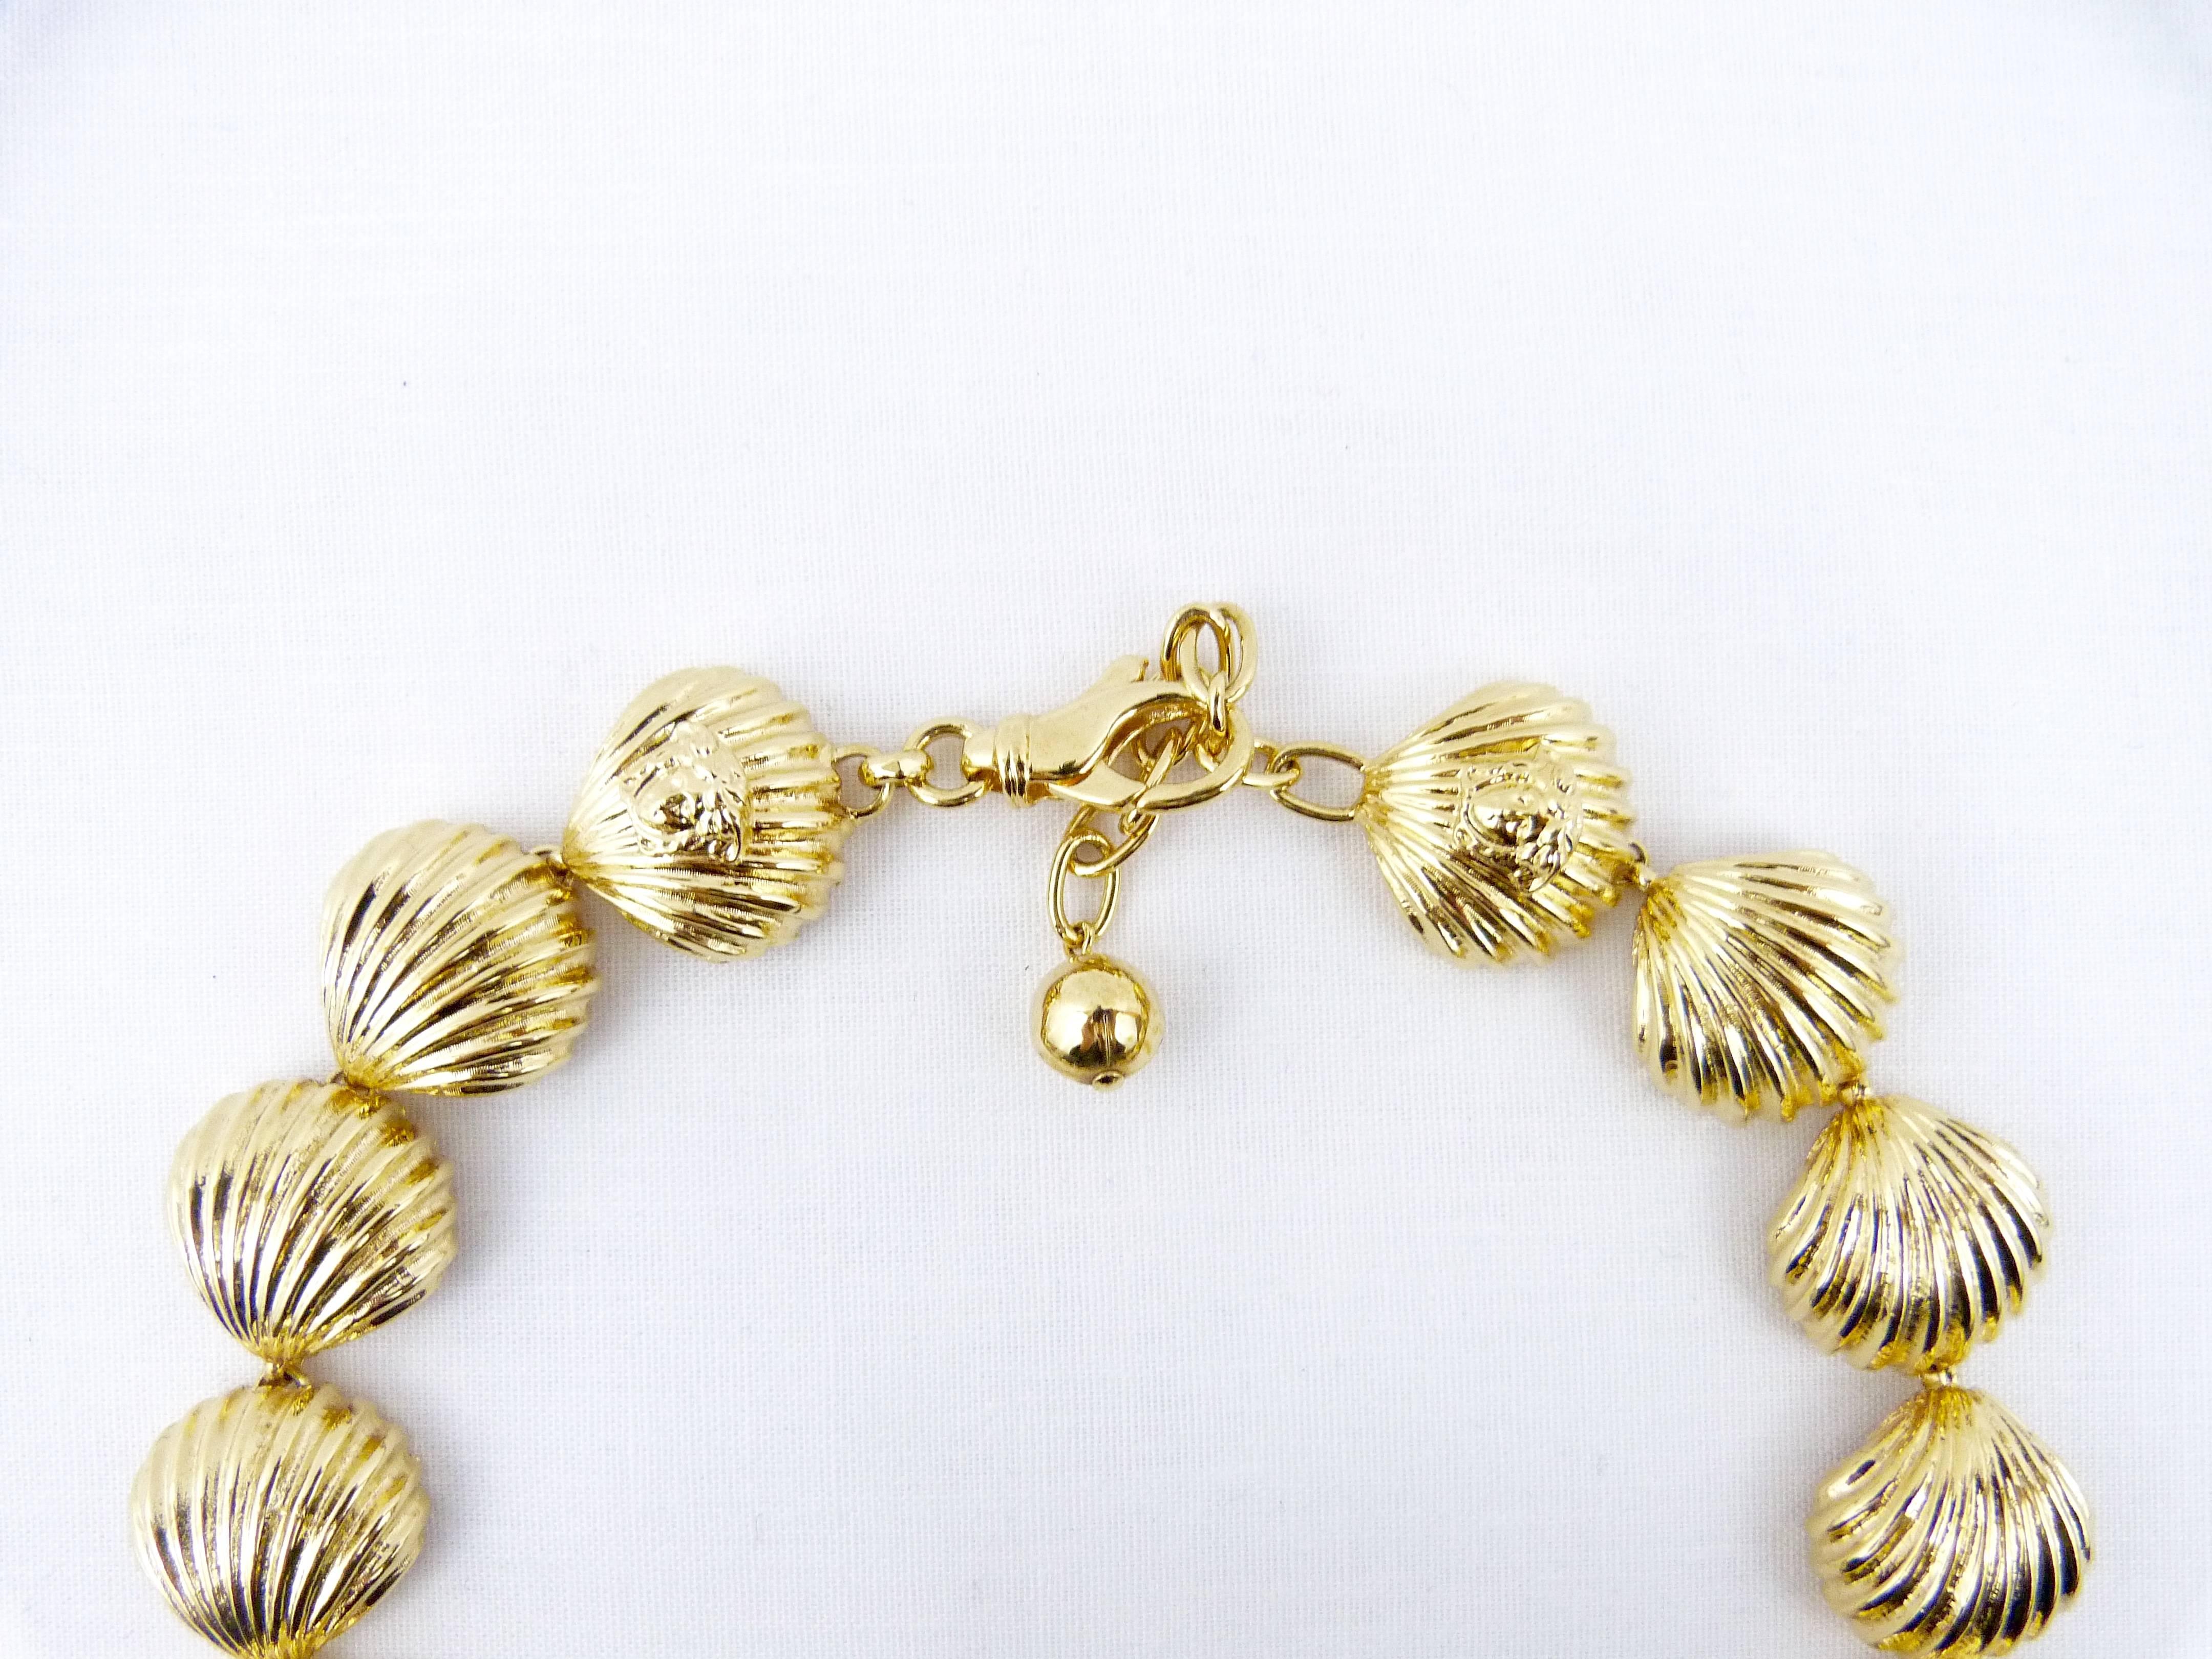 This Gianni Versace gold tone shell necklace is from the Spring Summer 1992 Tresor de la Mer collection which was inspired by the abundant treasures of the sea, reminiscent of Gianni's hometown in Calabria. The necklace is made up of 18 gold plated